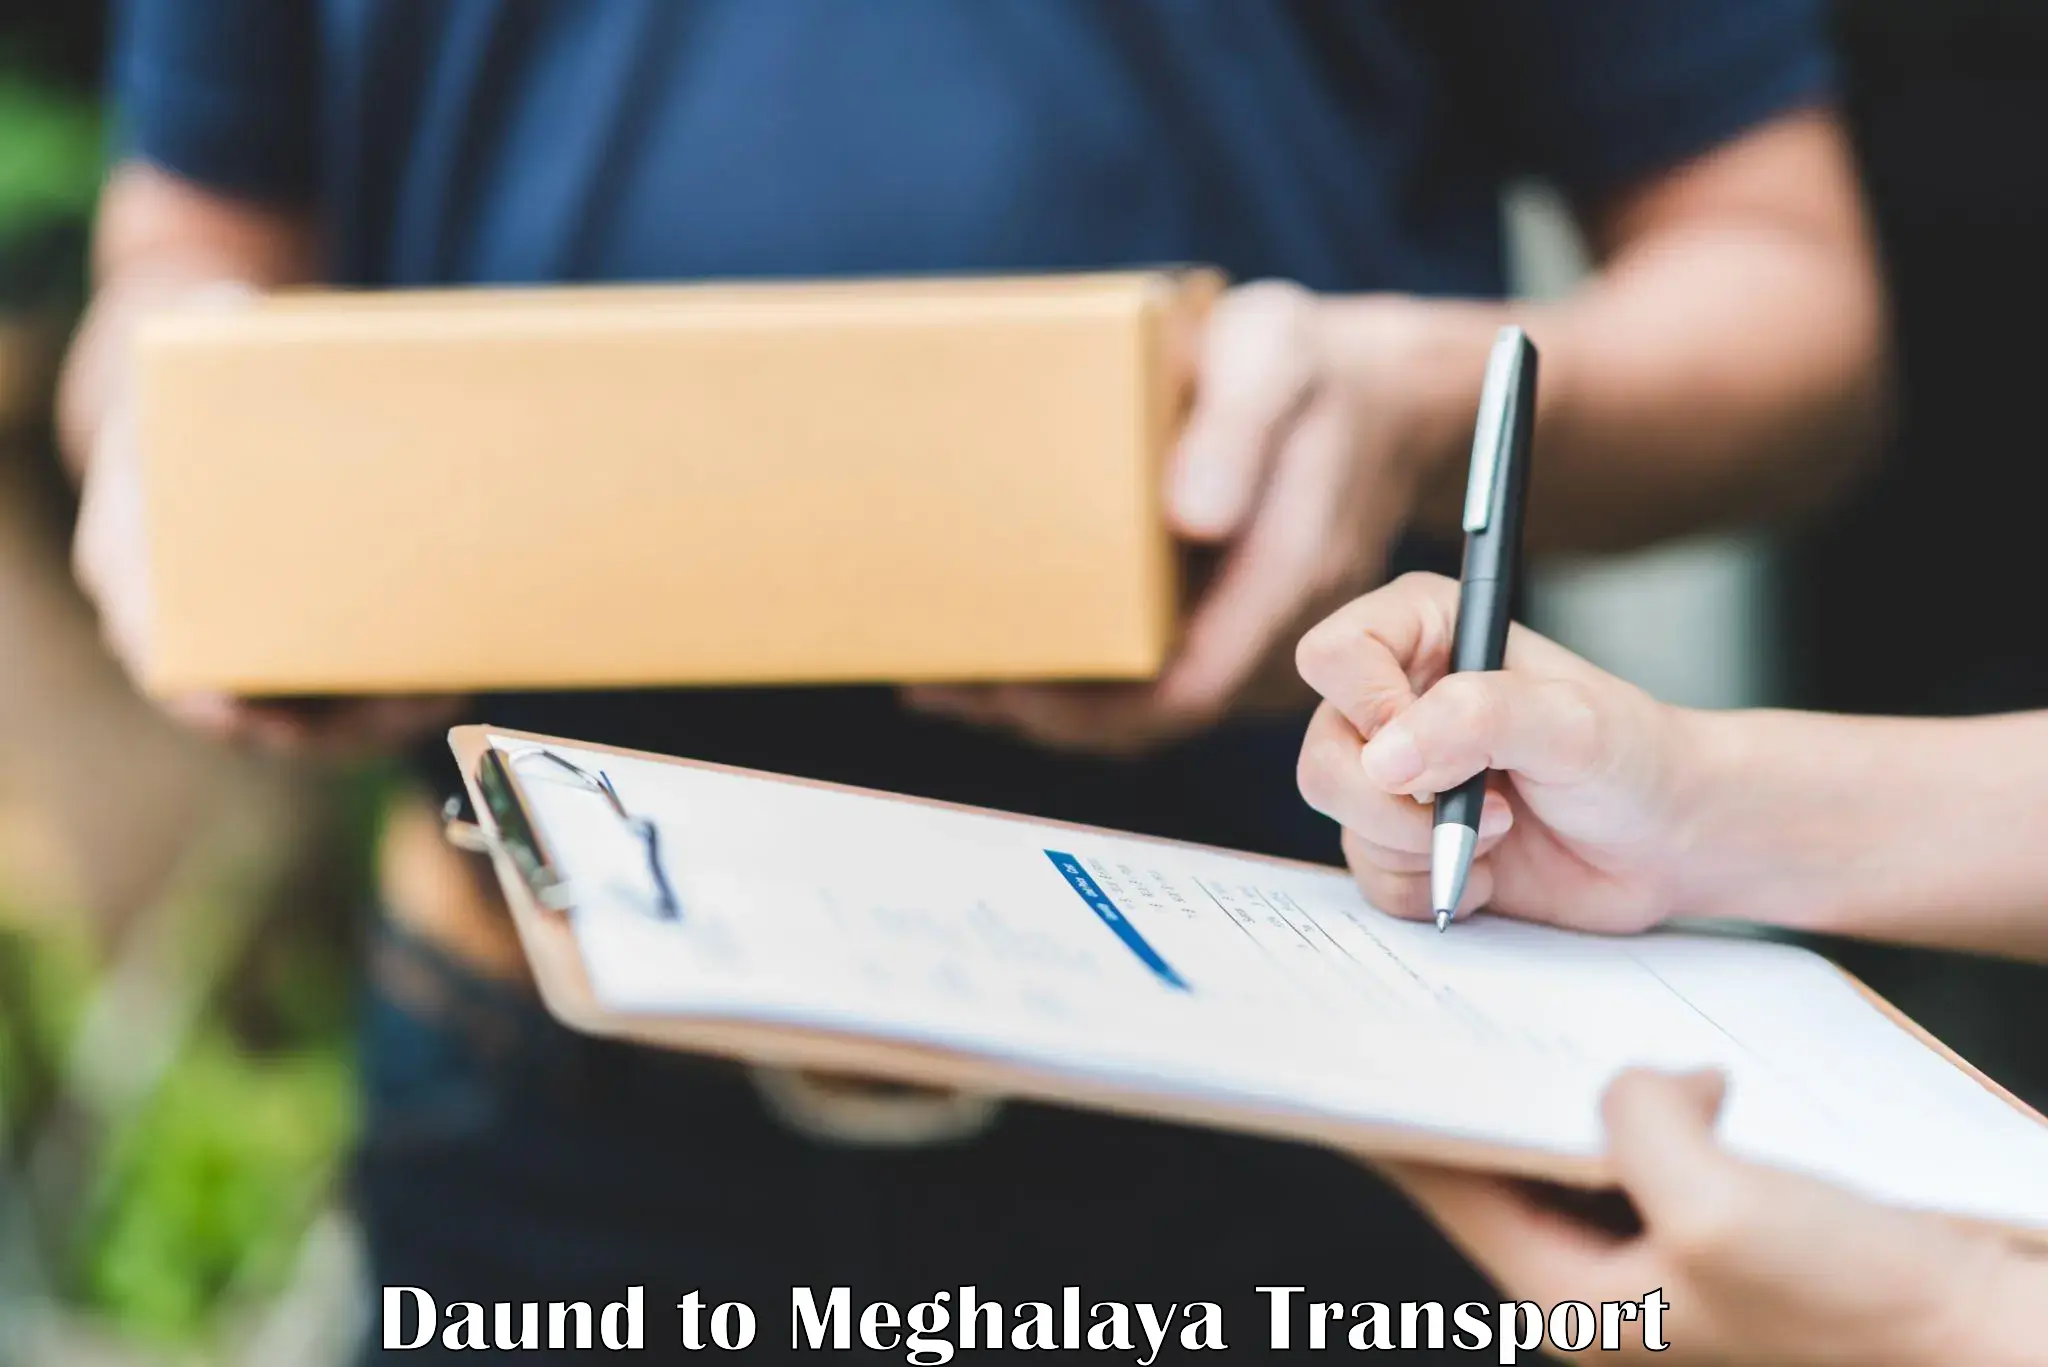 Commercial transport service Daund to Dkhiah West